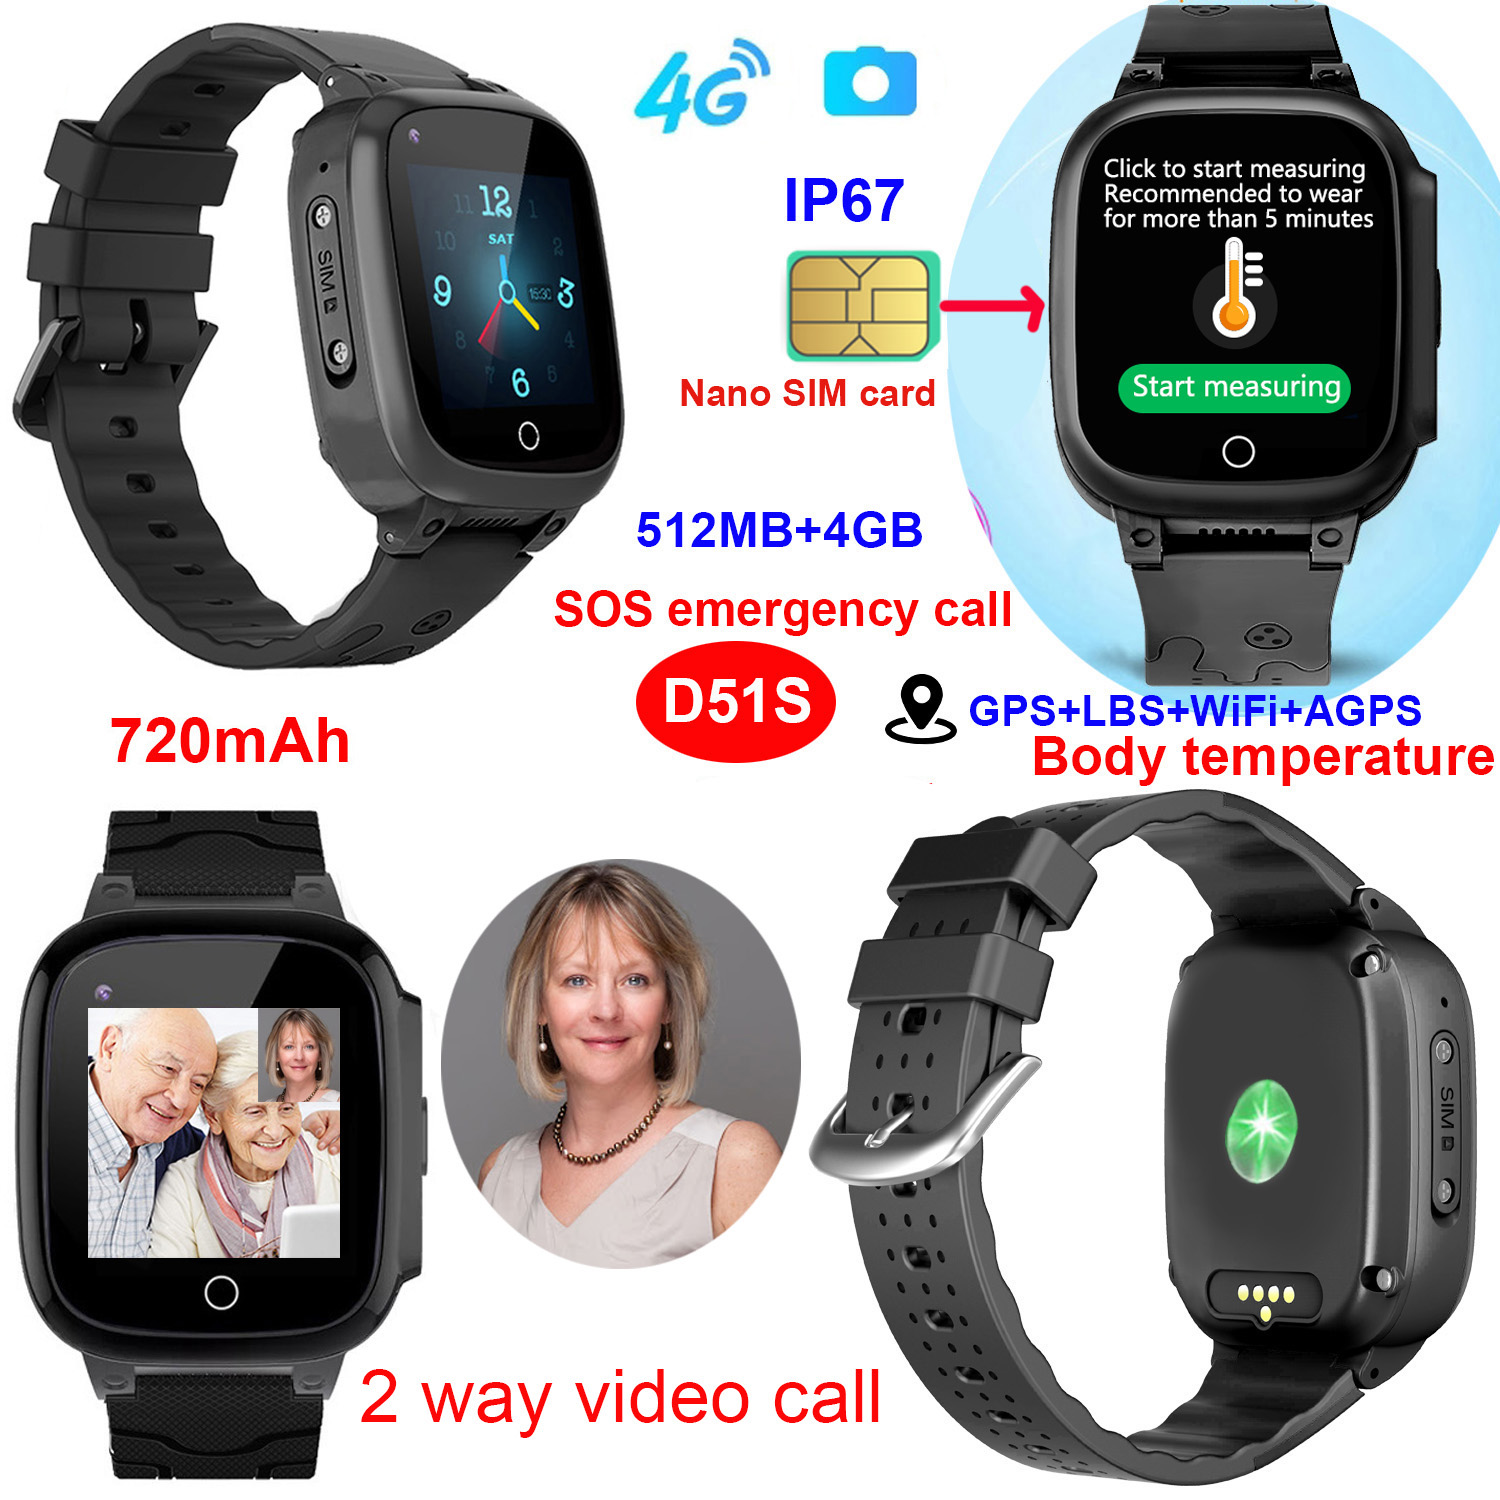 IP67 Waterproof safety 4G GPS Senior Smart Tracker Watch with Thermometer D51S